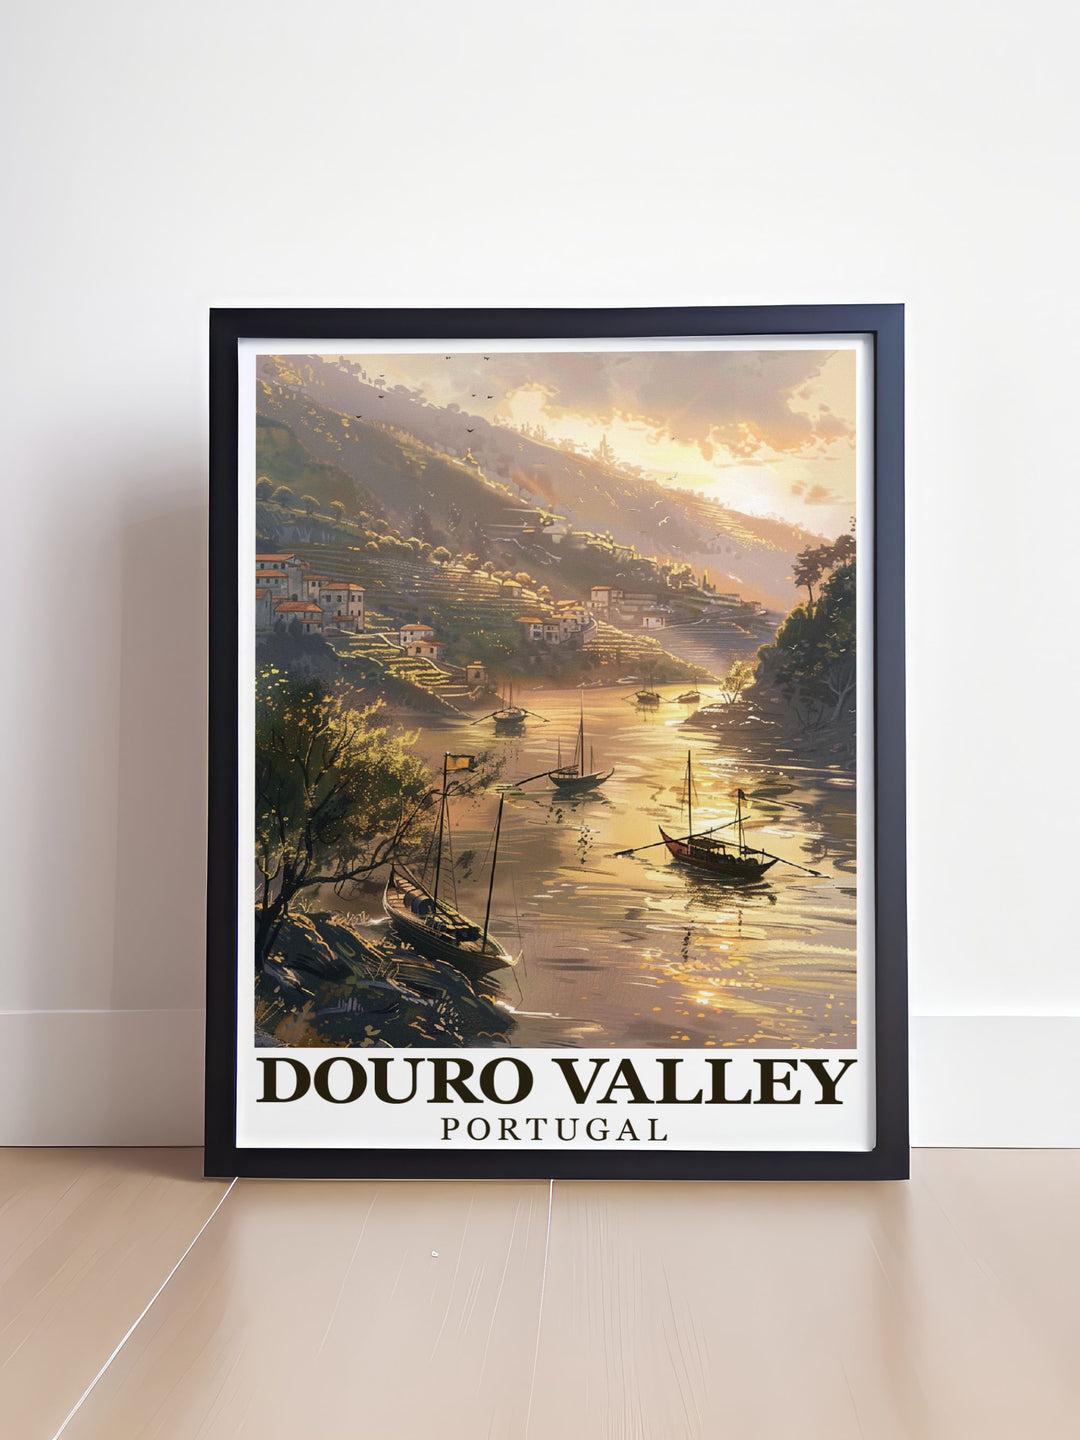 Travel poster of the Douro Valley highlighting the breathtaking views from the terraced vineyards, ideal for adventure enthusiasts and wine lovers.